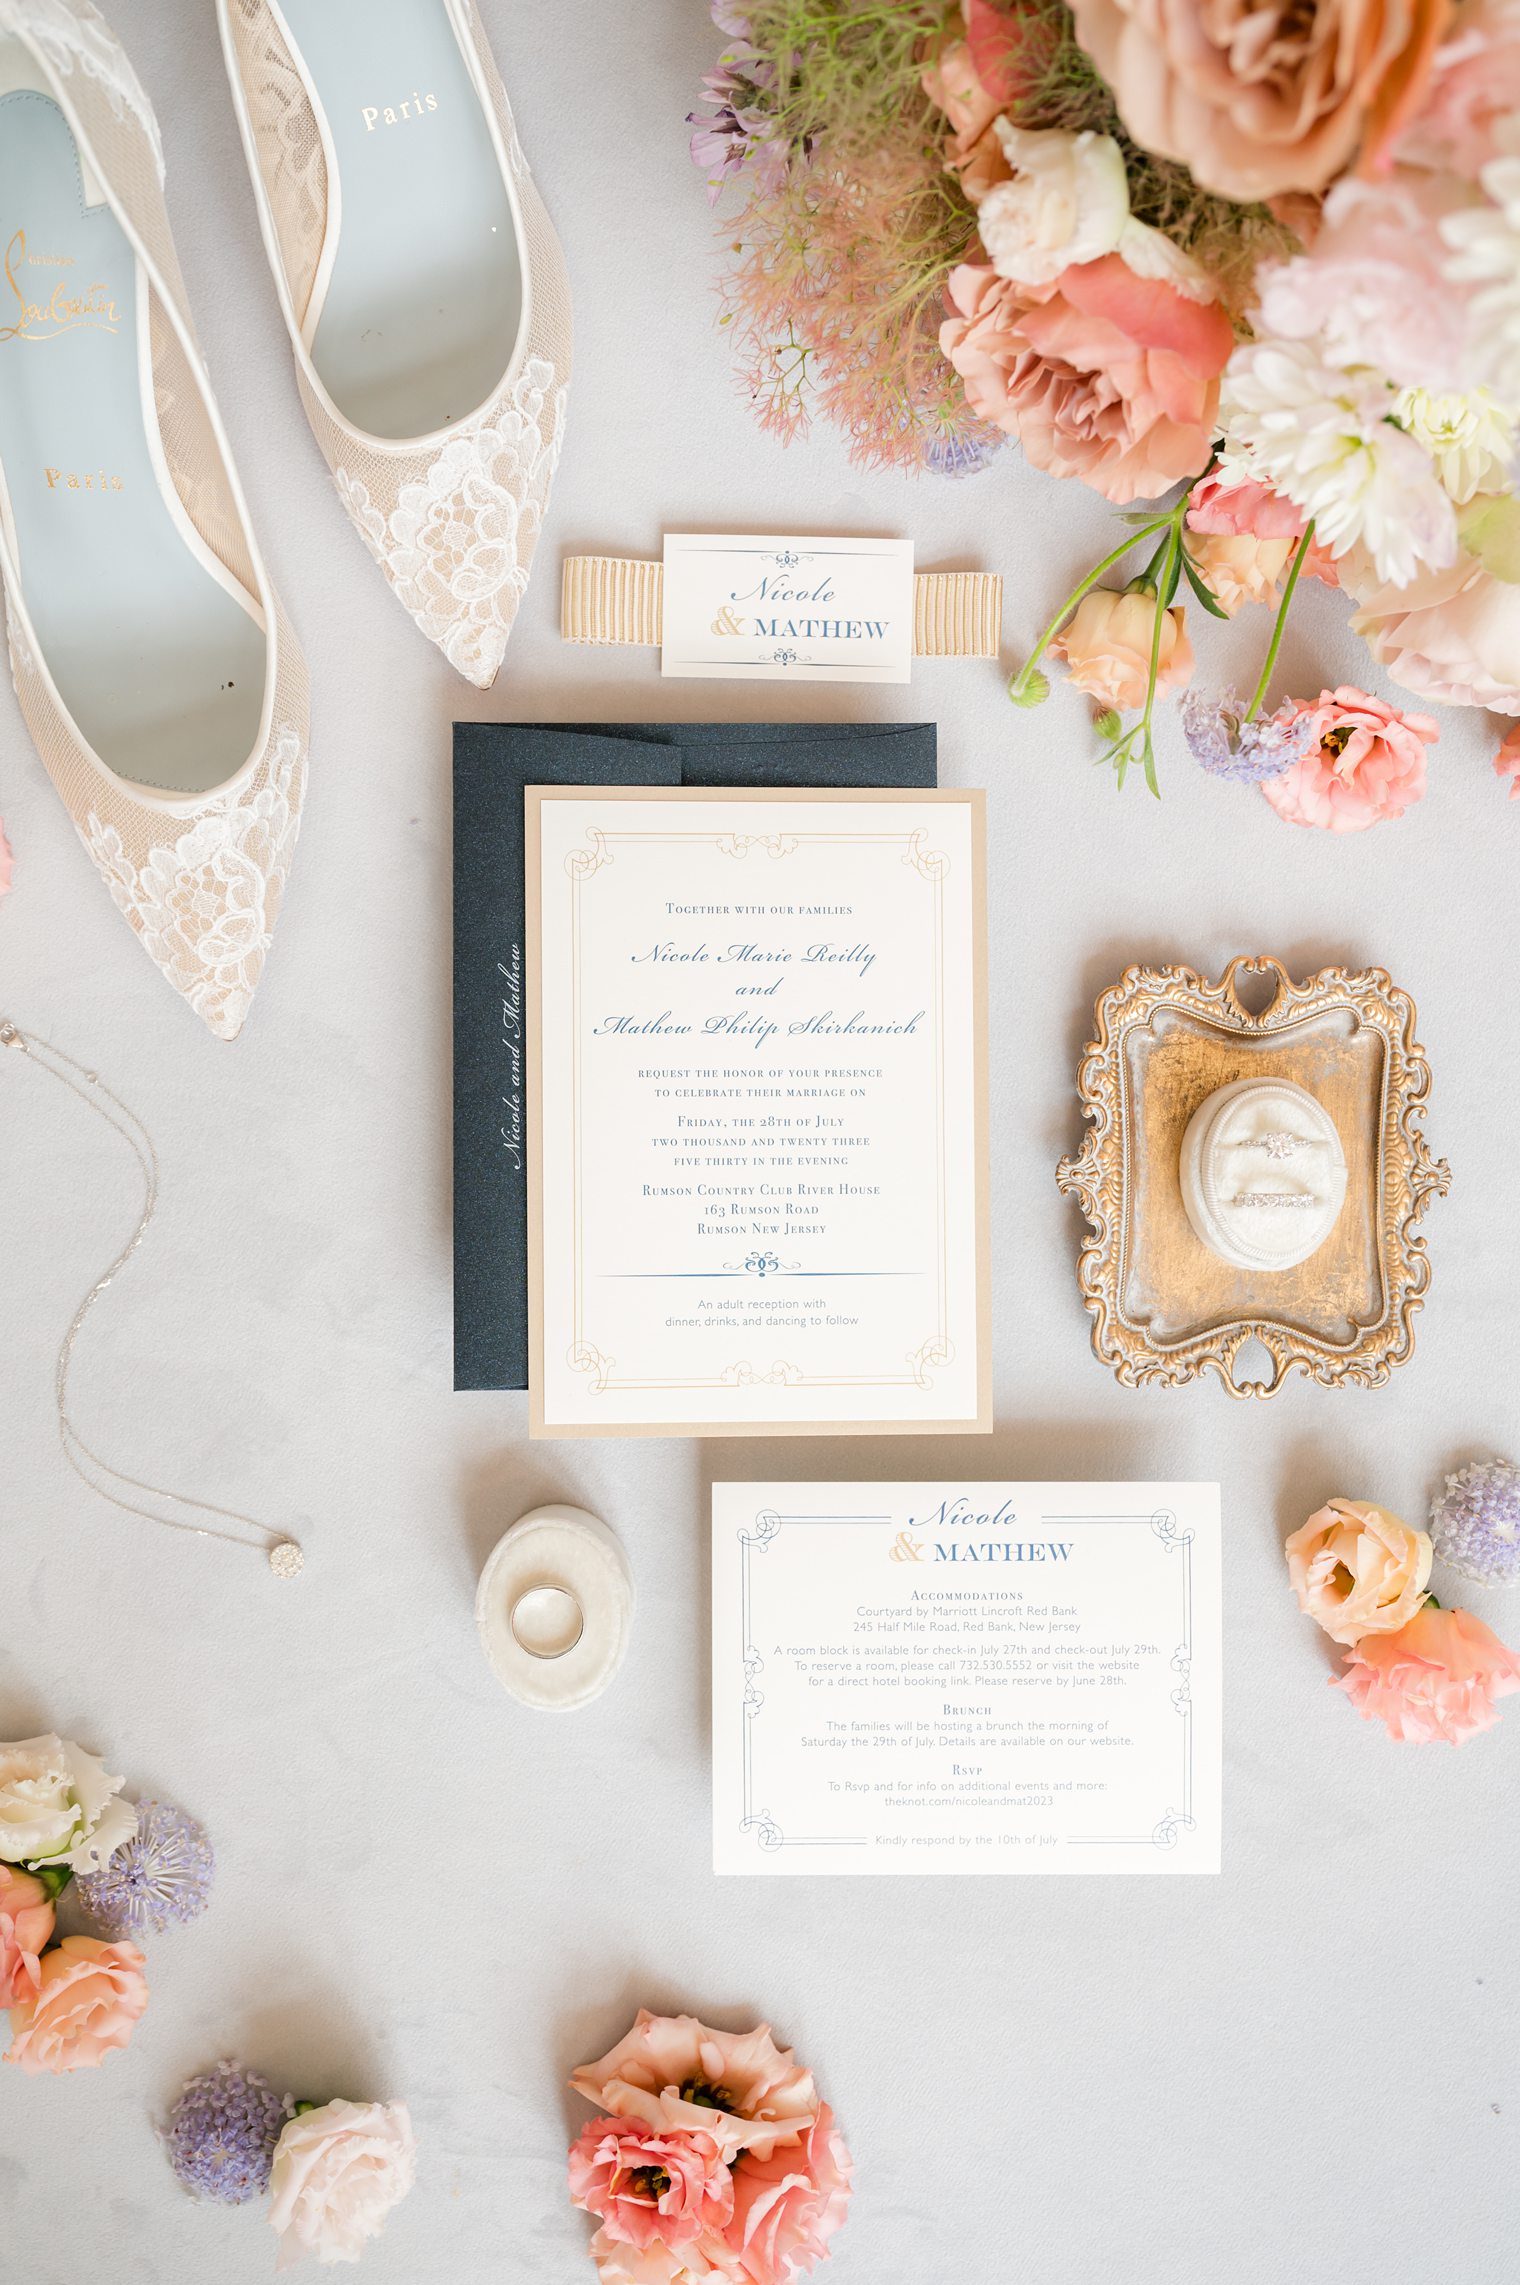 Invitation, wedding rings details at Riverhouse at Rumson Country Club